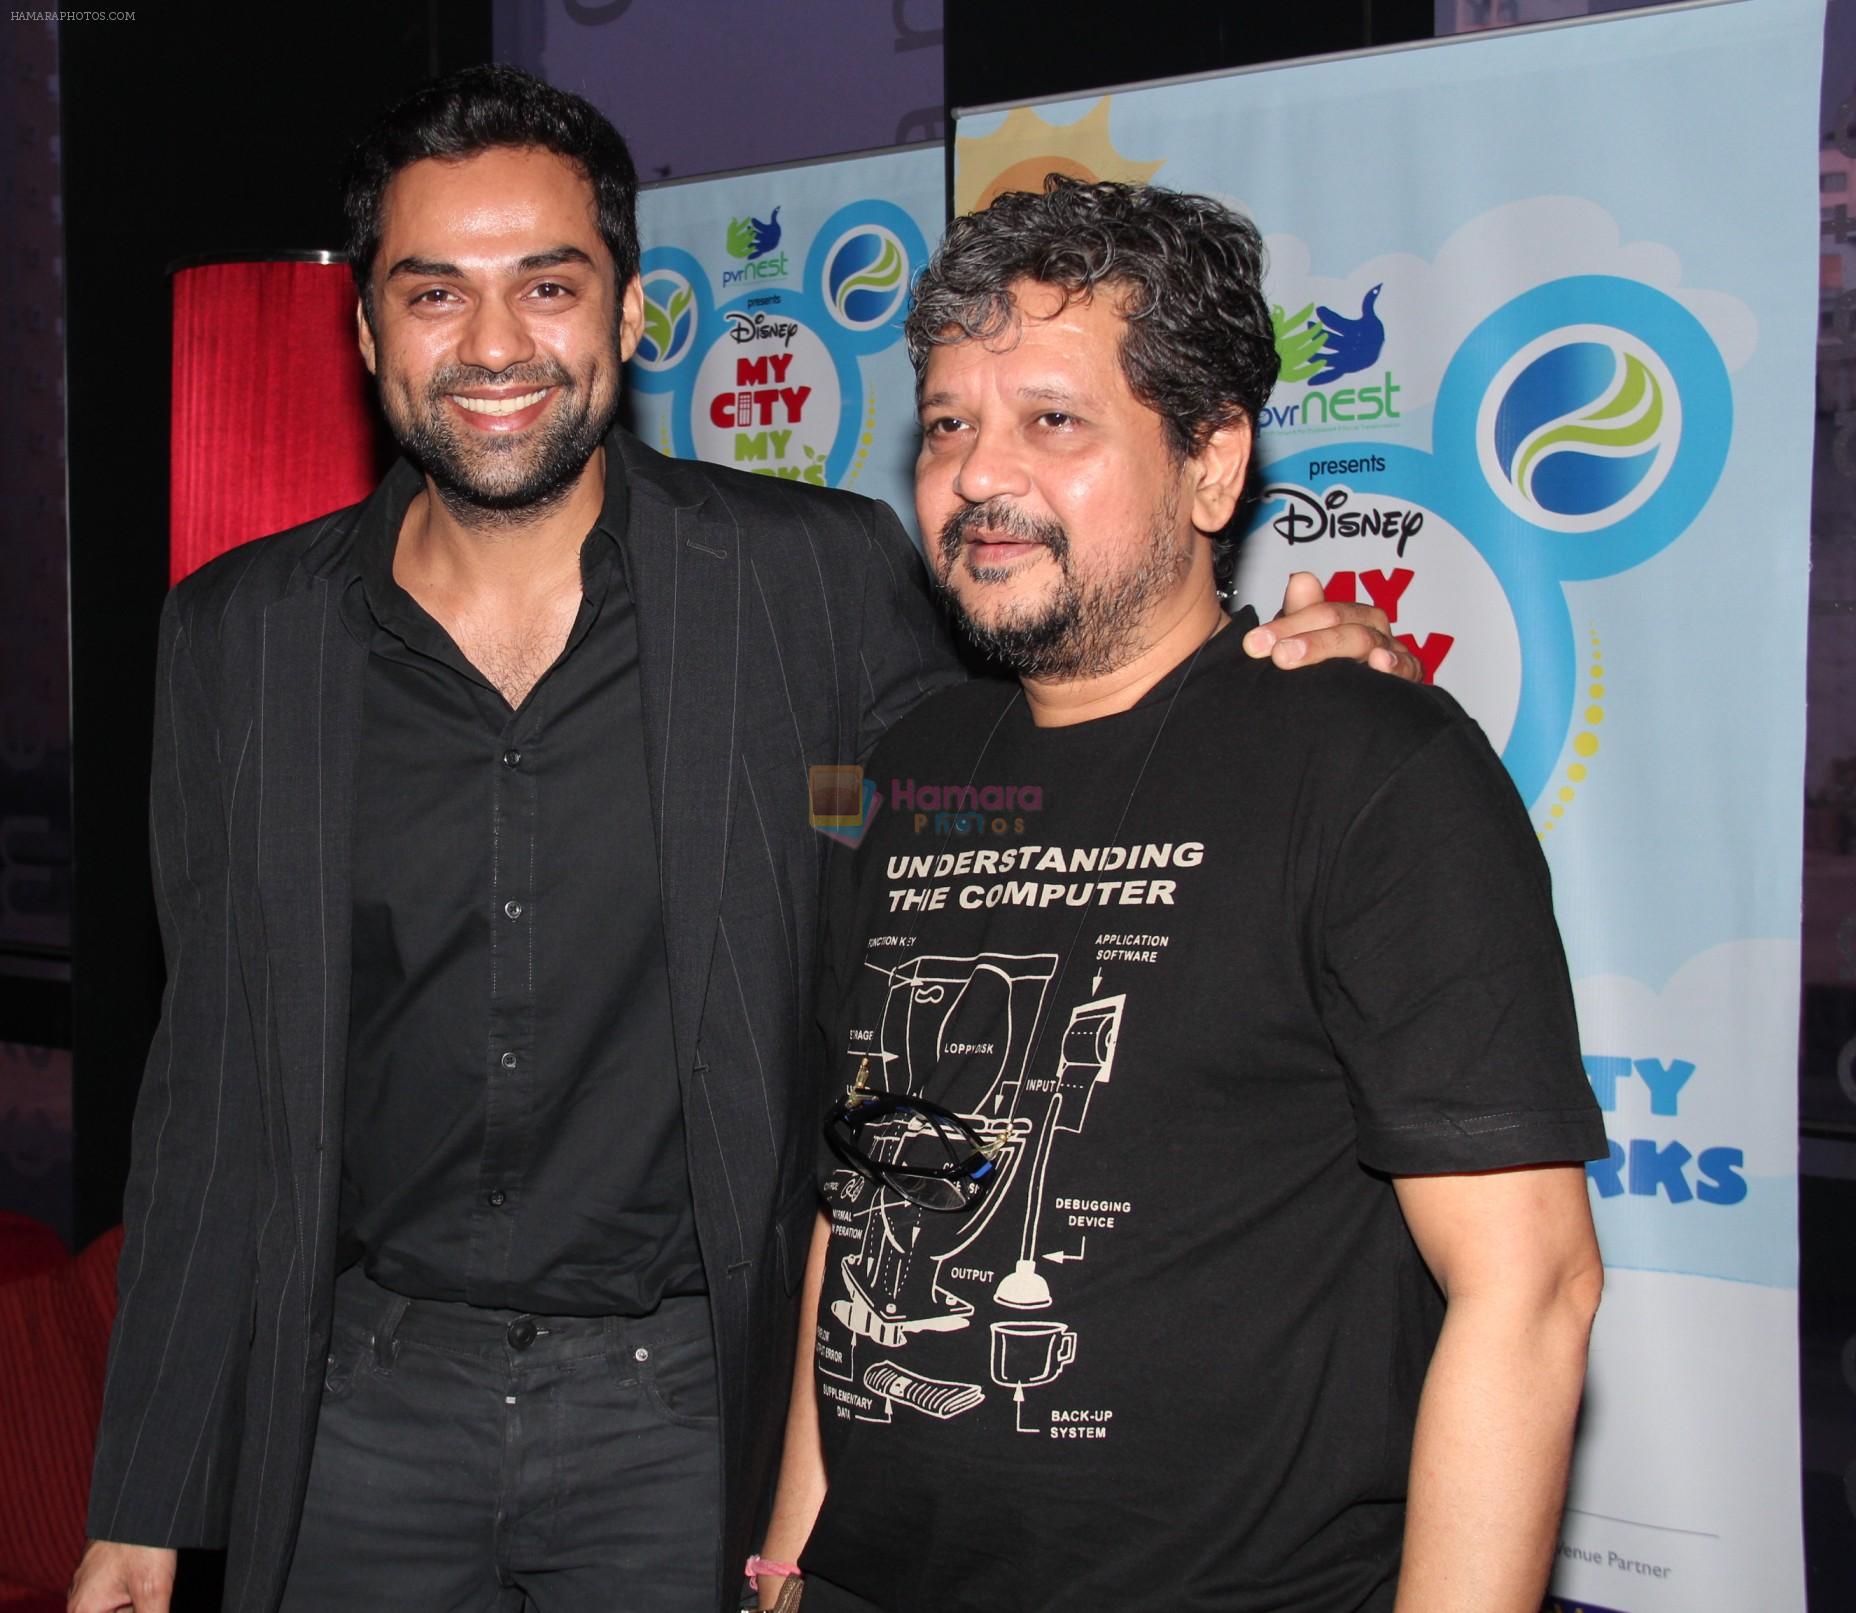 Abhay Deol and Amol Gupte launched Disney and PVR Nest _My City My Parks initiative_ in Mumbai on 15th Nov 2011